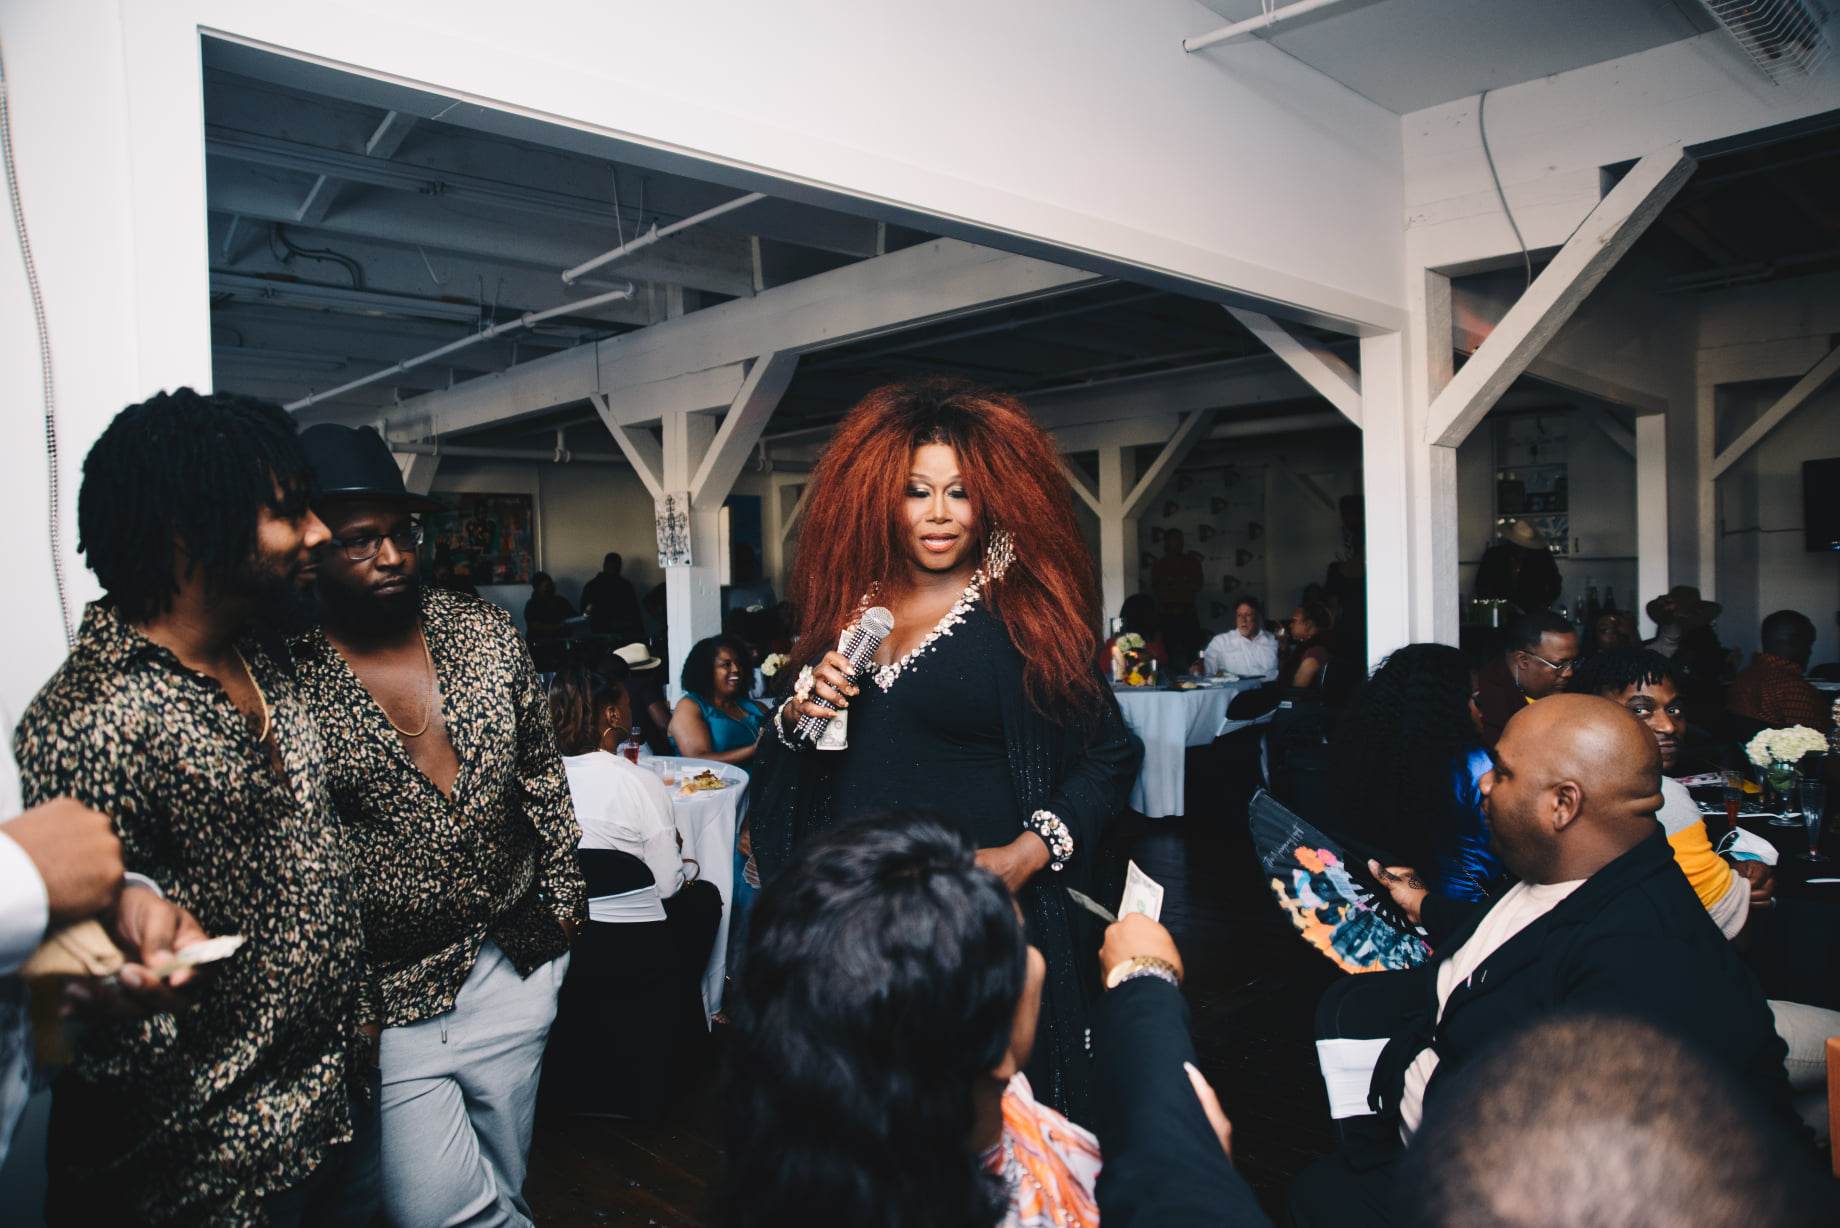 The Marque Awards is an event honoring community leaders that engages them to commit to being a part of developing the infrastructure for continued community support. Pictured is Roxanne Collins doing an impression of Chaka Khan.